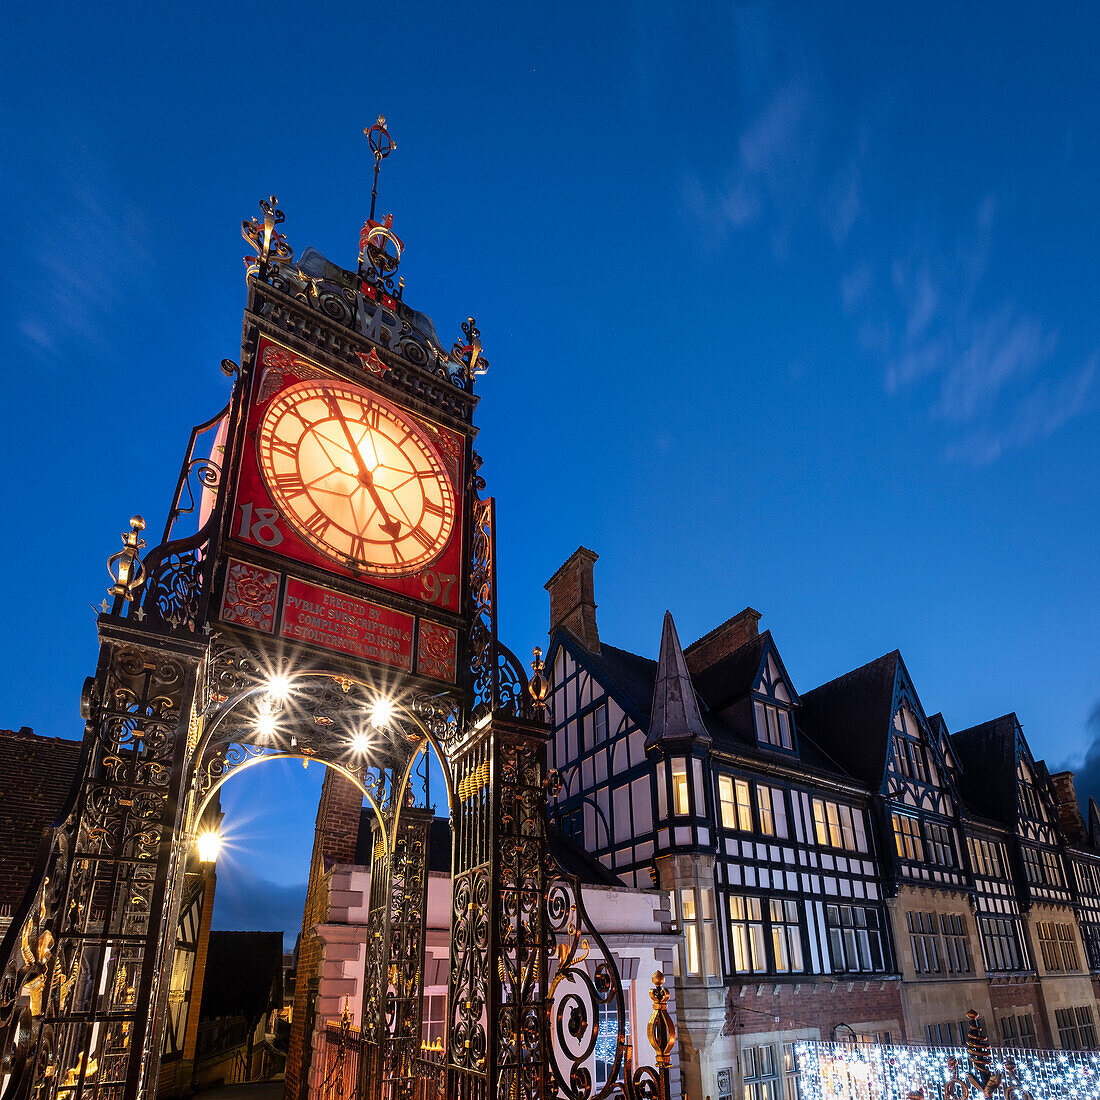 The Victorian Eastgate Clock on the city walls at night, Eastgate Street, Chester, Cheshire, England, United Kingdom, Europe